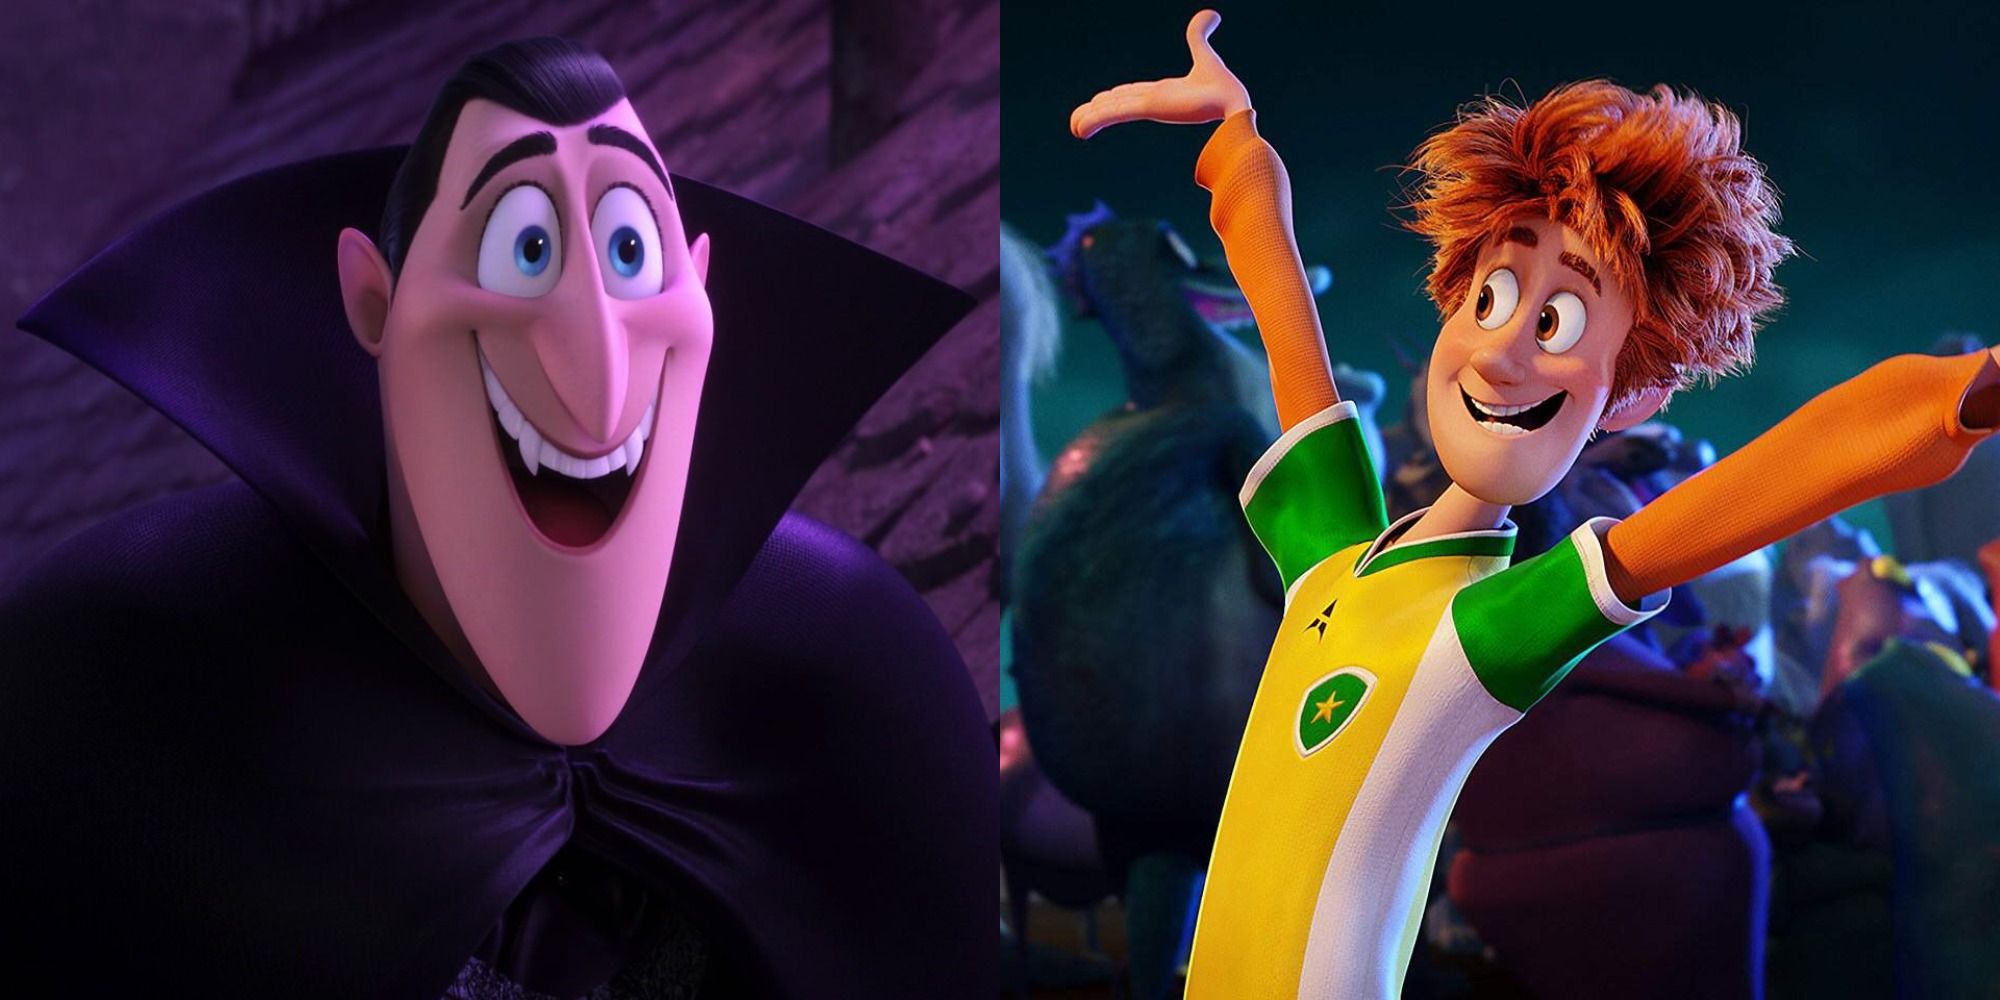 Split image showing Dracula and Johnny in Hotel Transylvania